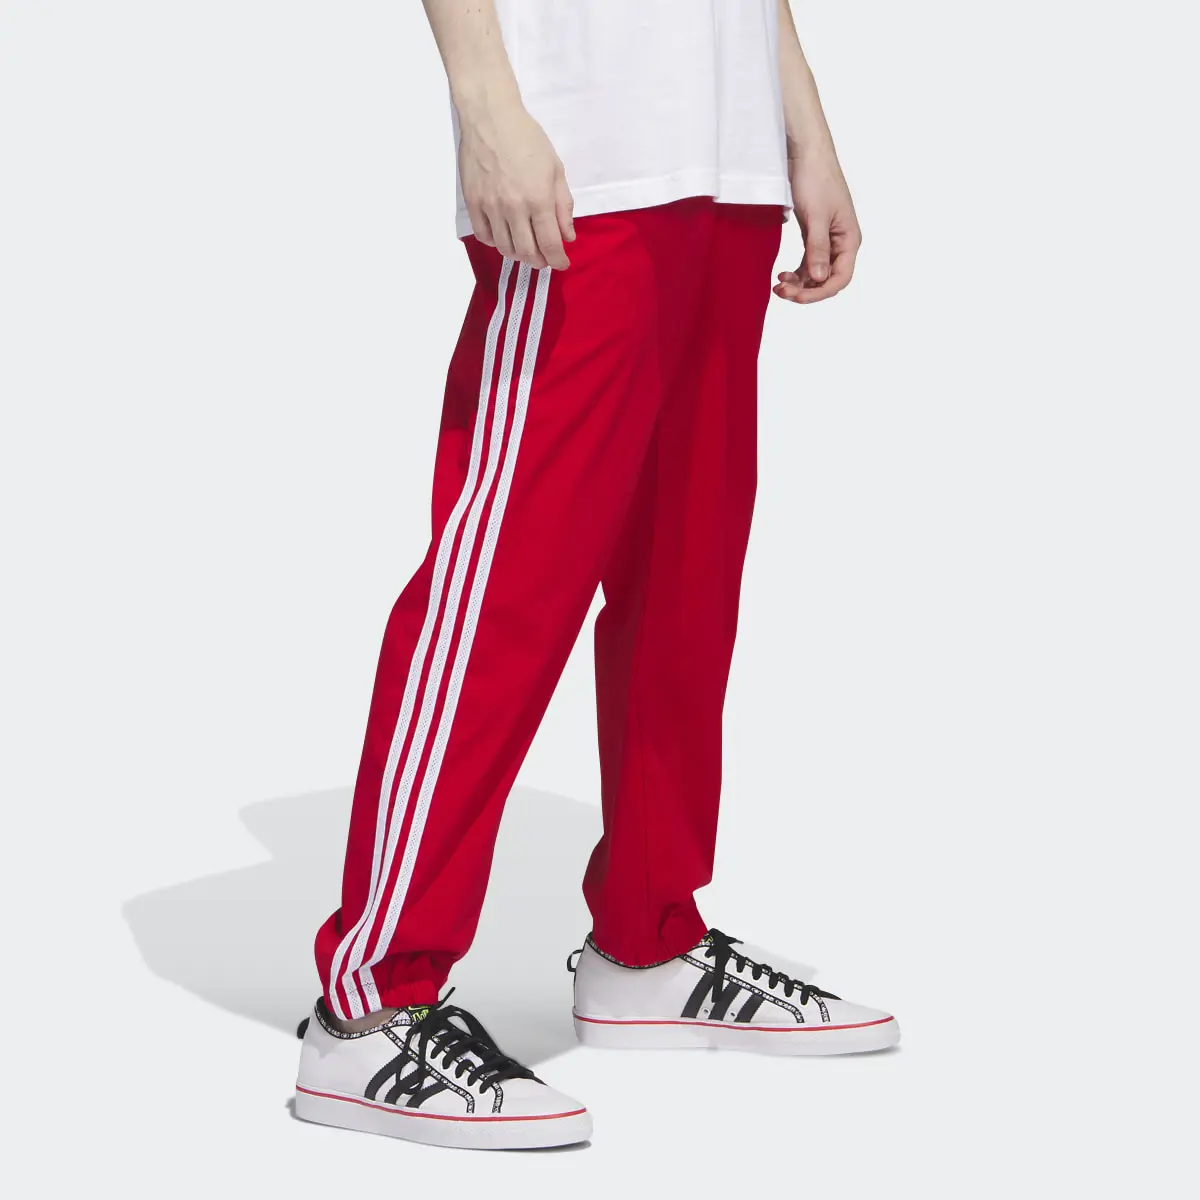 Adidas Woven Tracksuit Bottoms. 3